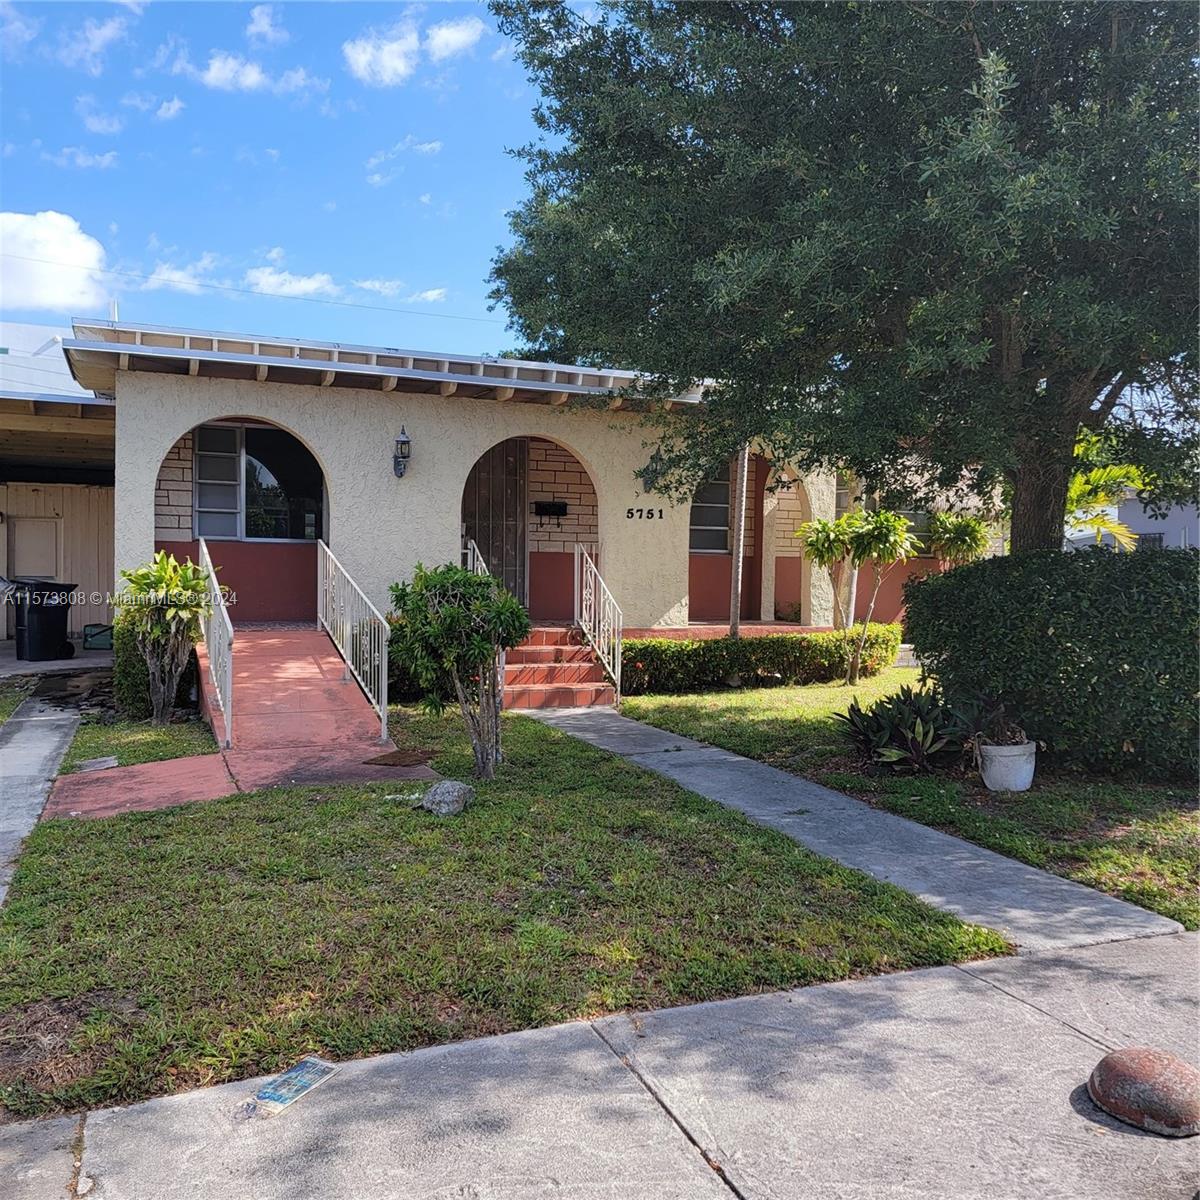 Perfect for an investor to come in a finish this 4/2. New roof just went in. Both bathrooms have been remodeled with new vinyl flooring throughout. New kitchen with quartz countertops and open concept main Livingroom area. Huge master bedroom overlooking  a great patio area. One block away from University of Miami, this home can be used for rental or a family home. Near shopping malls, Coral Gables, South Miami and thirty minutes to Miami Beach.